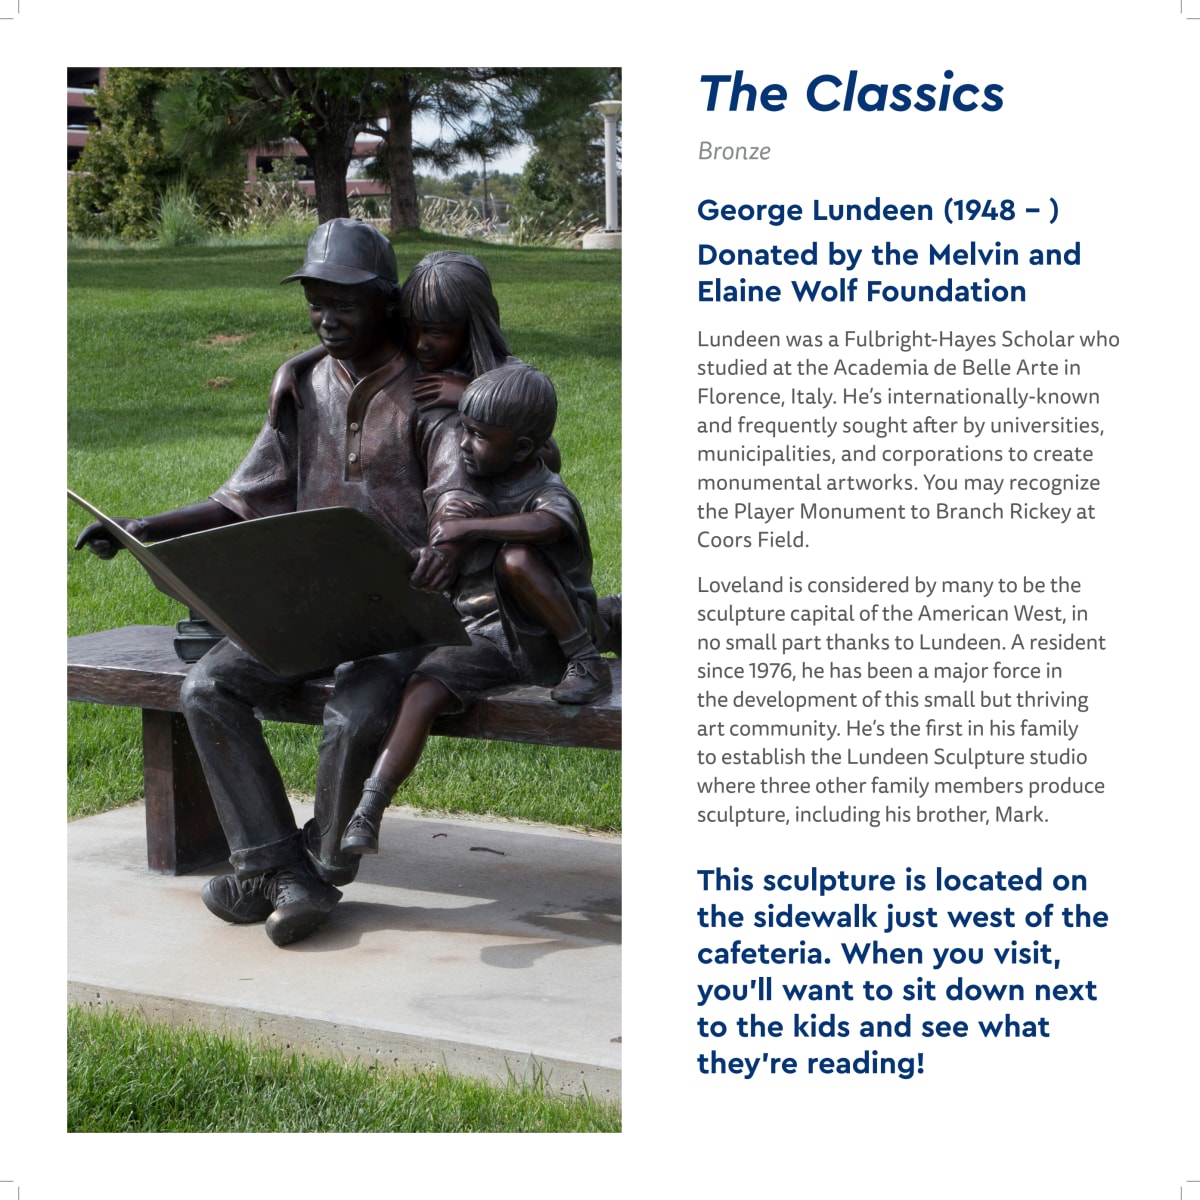 The Classics by George Lundeen 